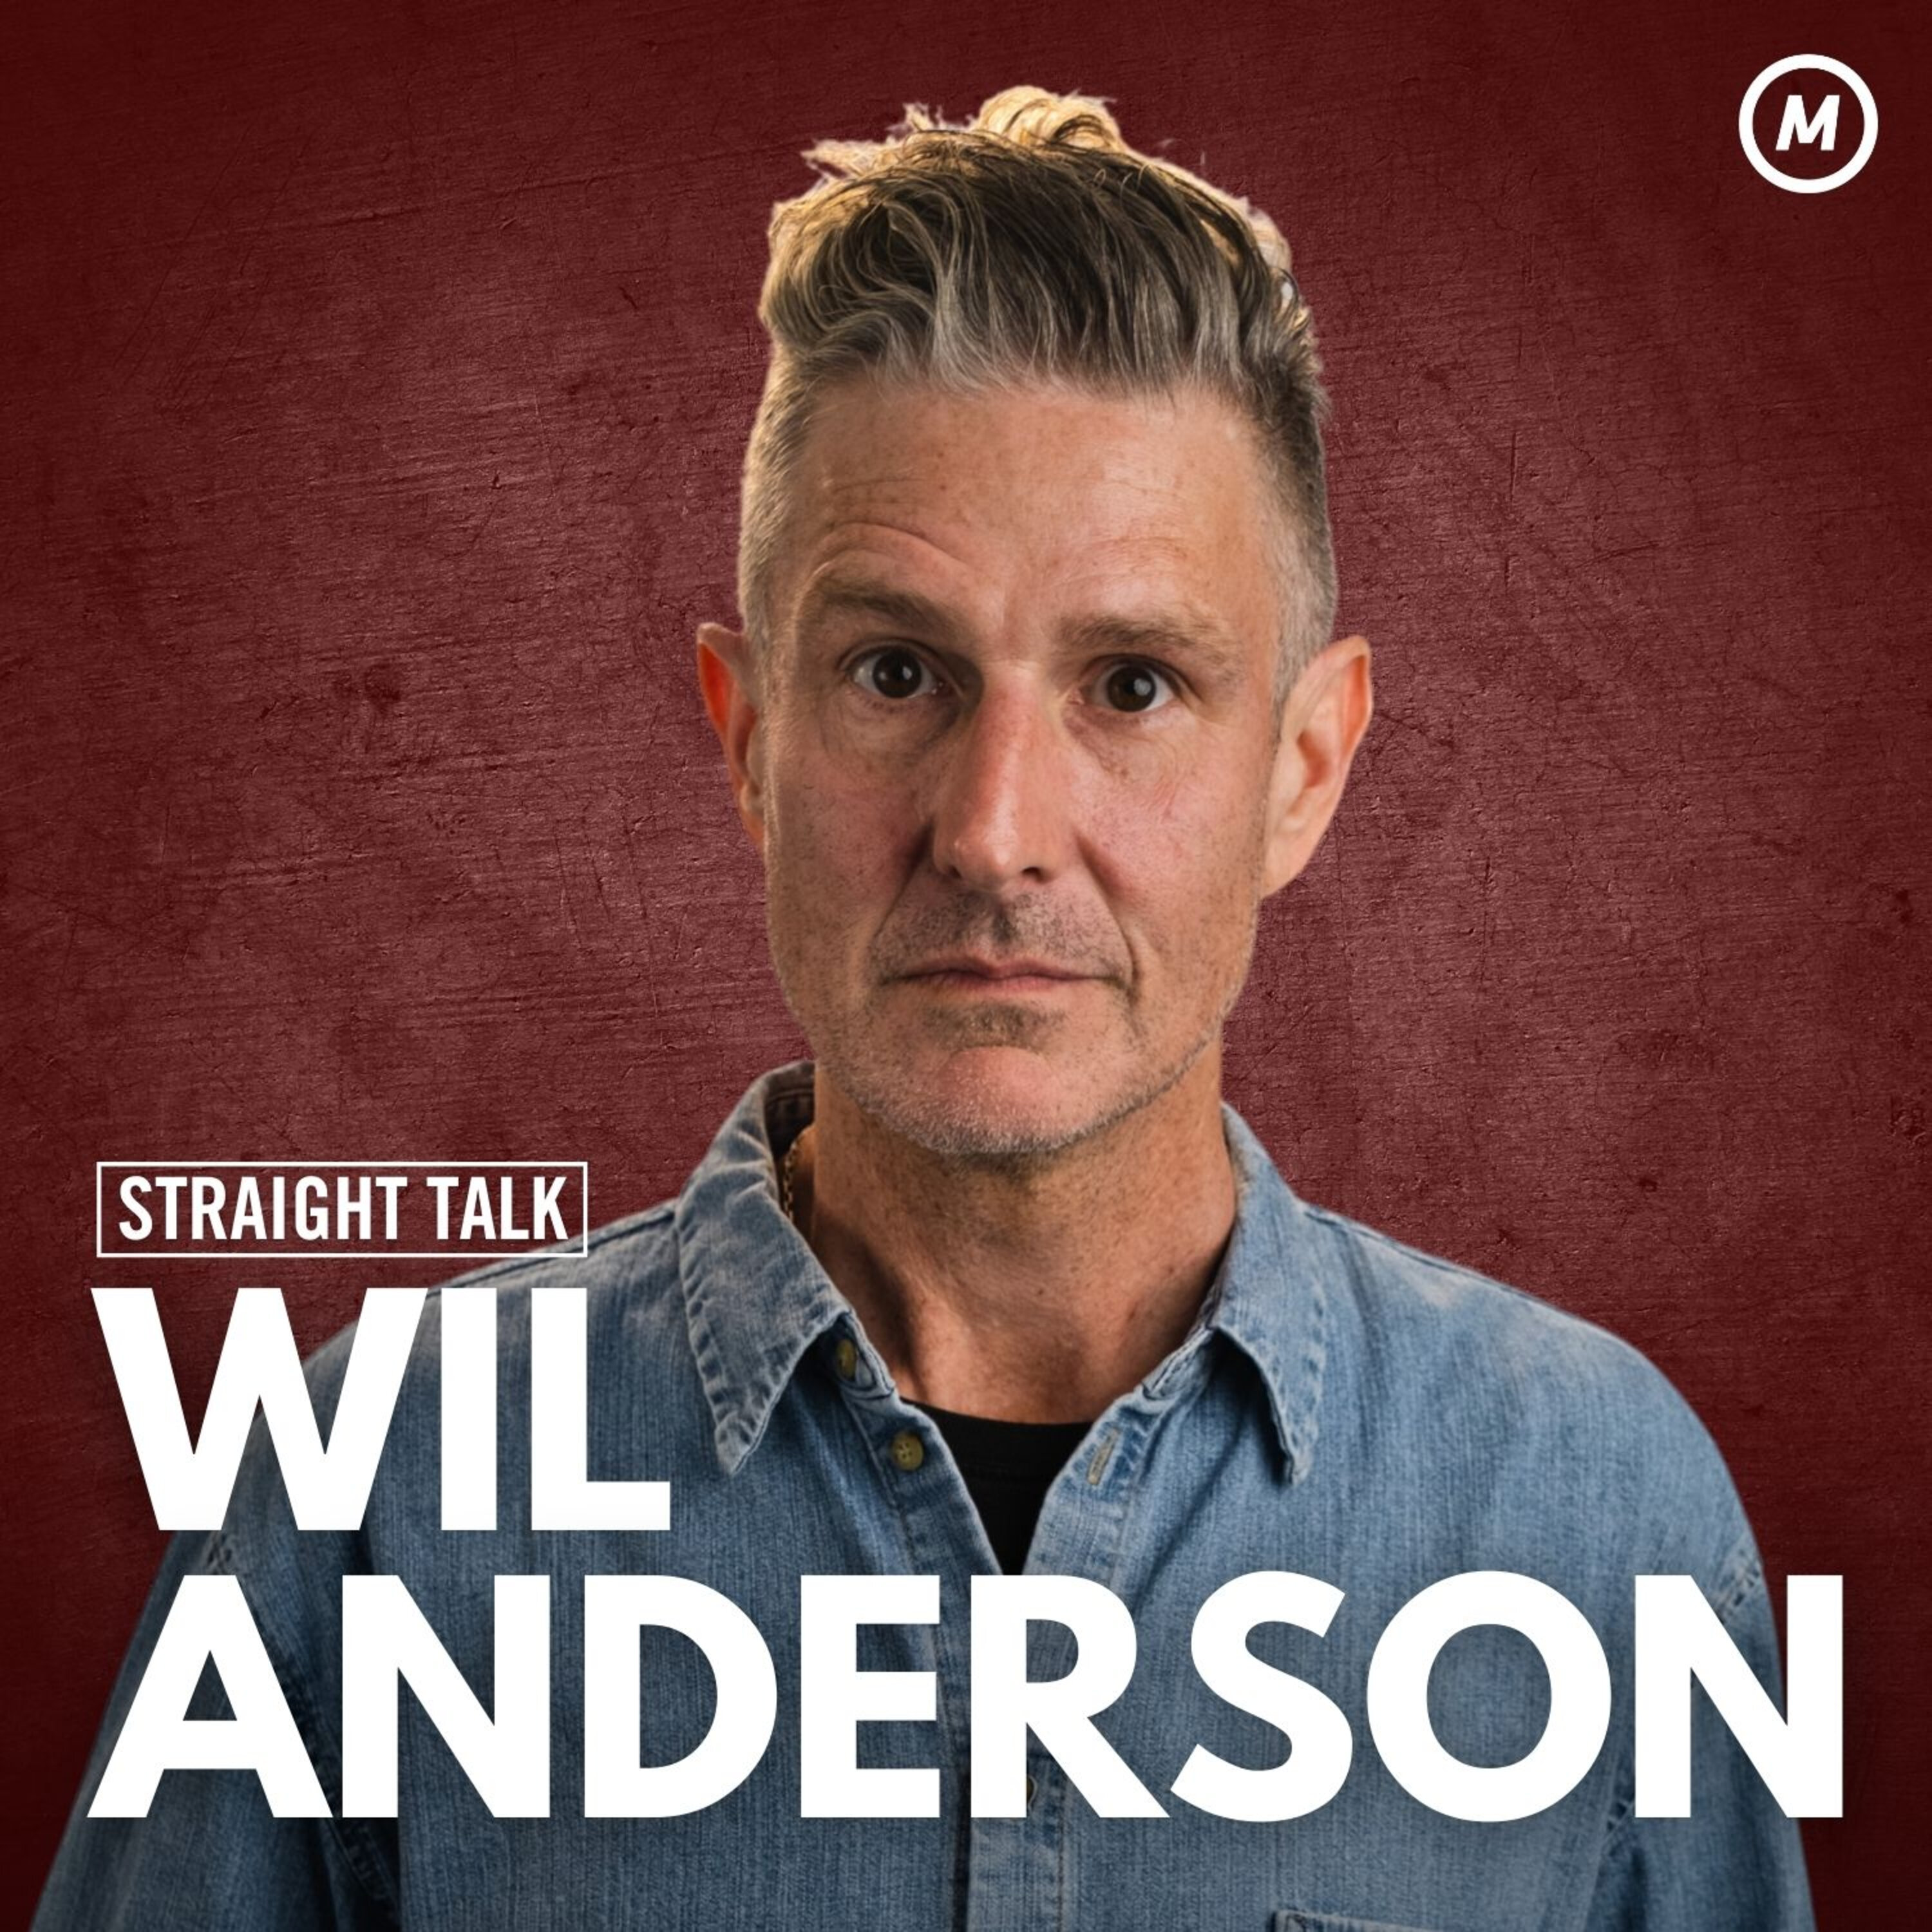 #53 Comedian Wil Anderson: I don't have confidence but I do things anyway